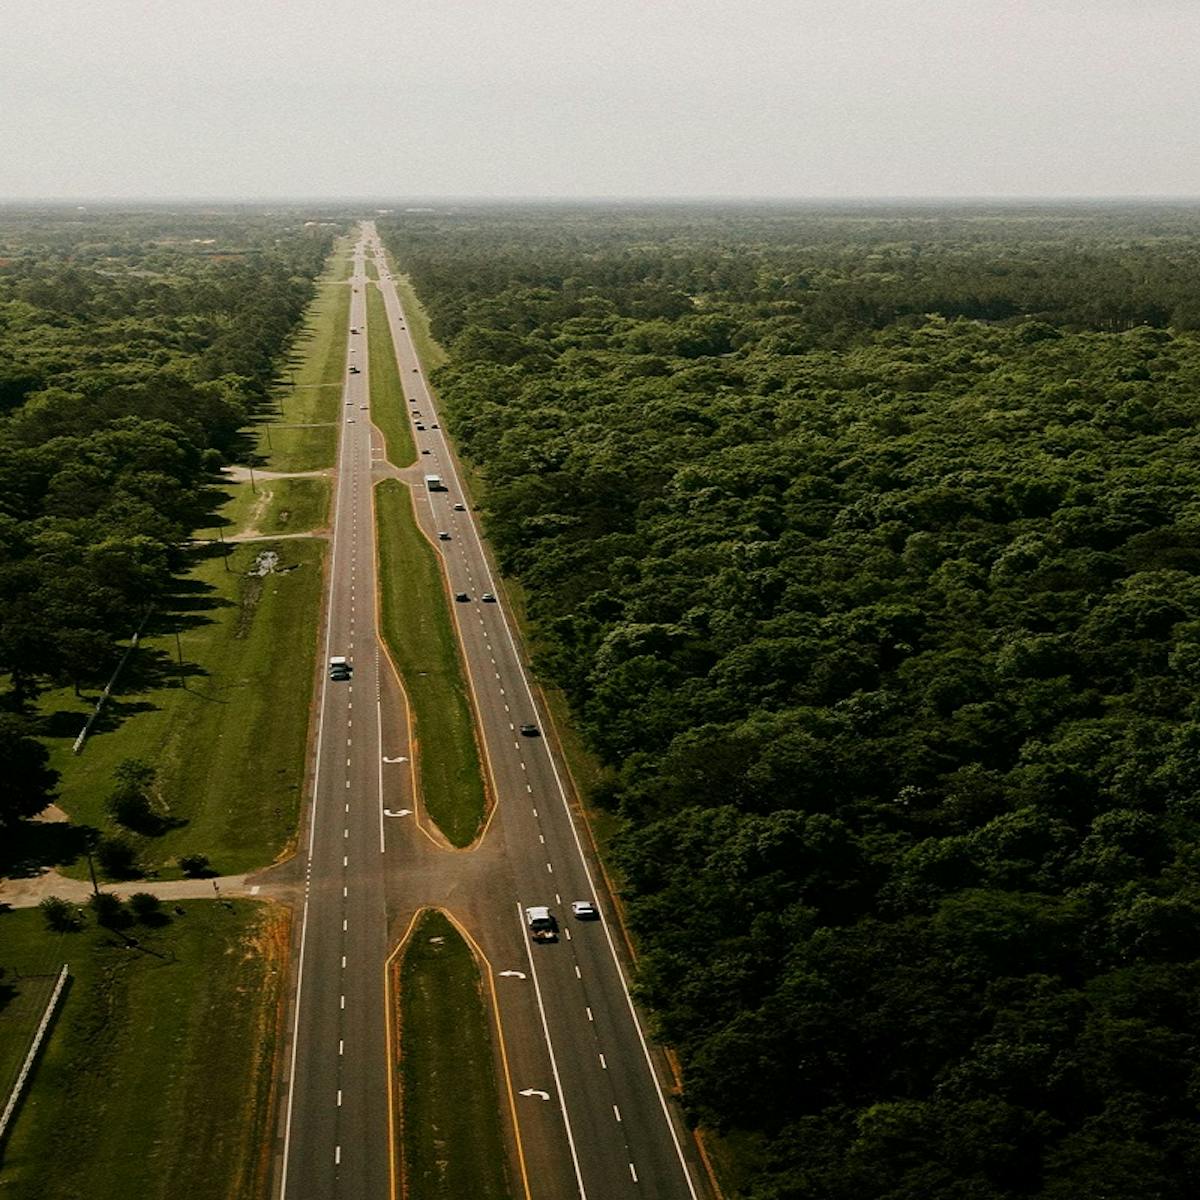 An interstate splits through a forest. The omission of wildlife corridors on an interstate like this means no safe crossing for animals.